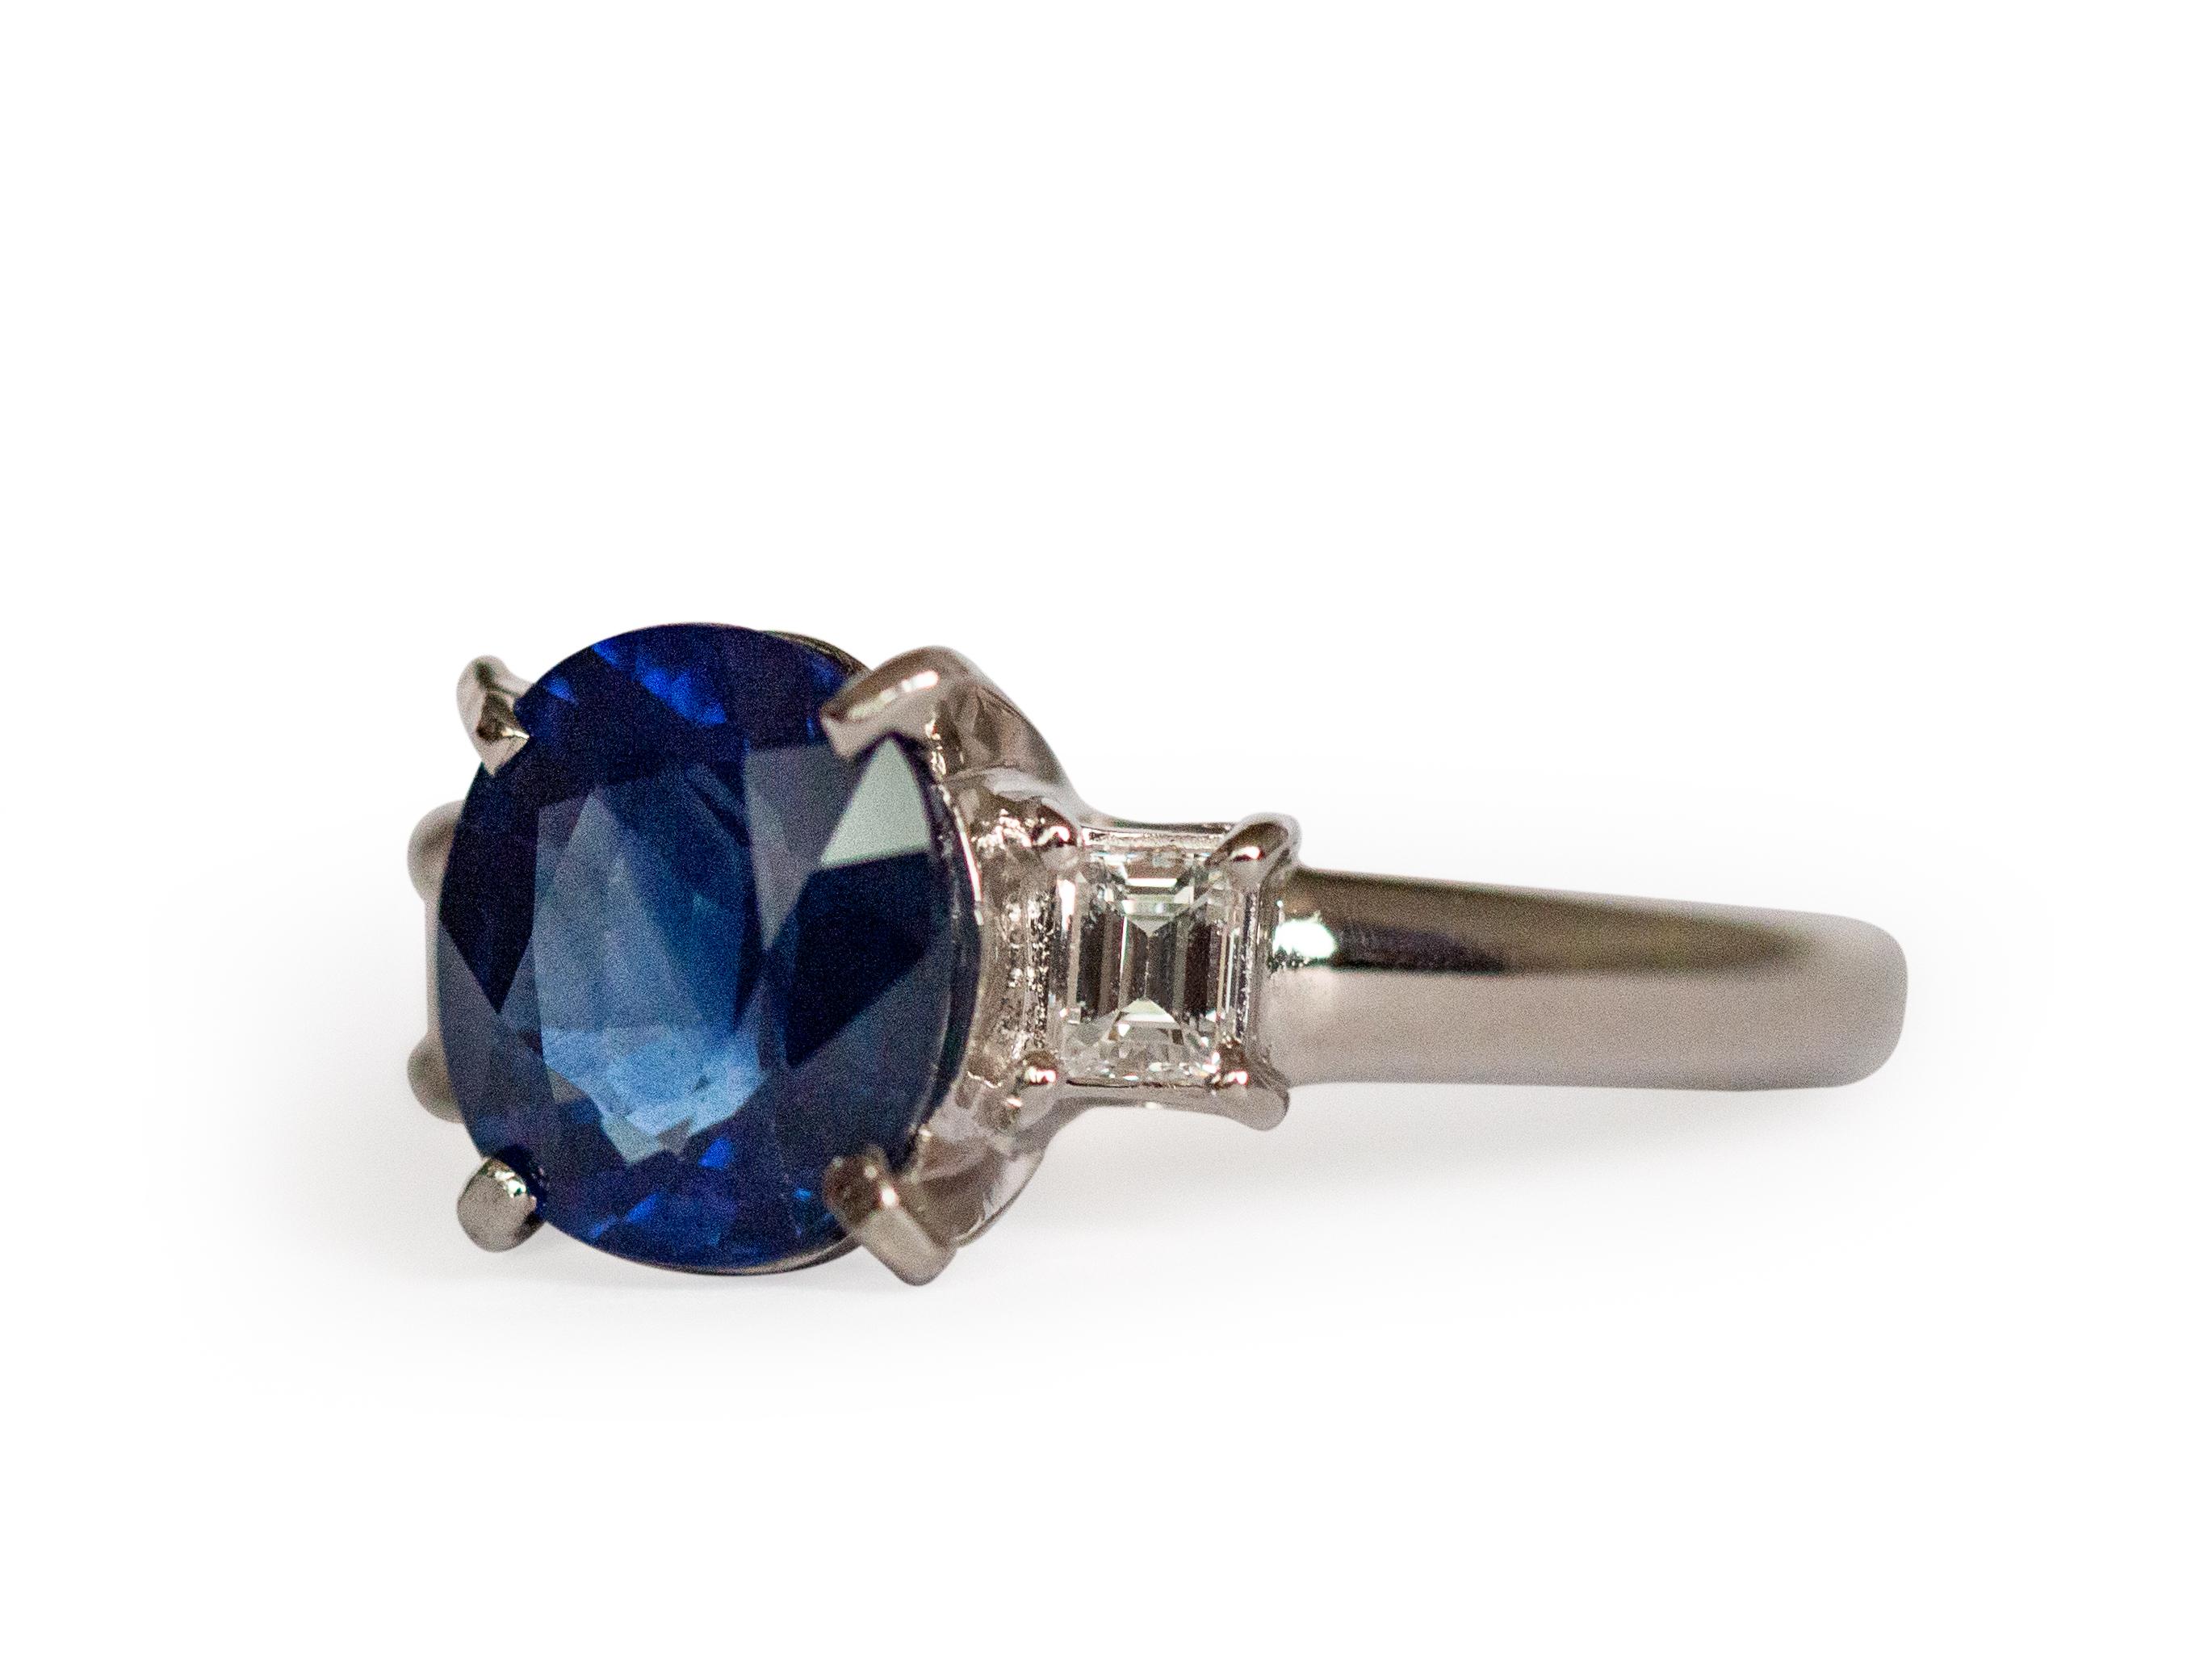 Ring Size: 6
Metal Type: Platinum  [Hallmarked, and Tested]
Weight:  5  grams

Center Sapphire Details:
Weight: 2.50 carat
Cut: Oval Brilliant
Color: Blue
Clarity: VS
Heated

Side Diamond Details:
Weight: .50 carat, total weight
Cut: Carre